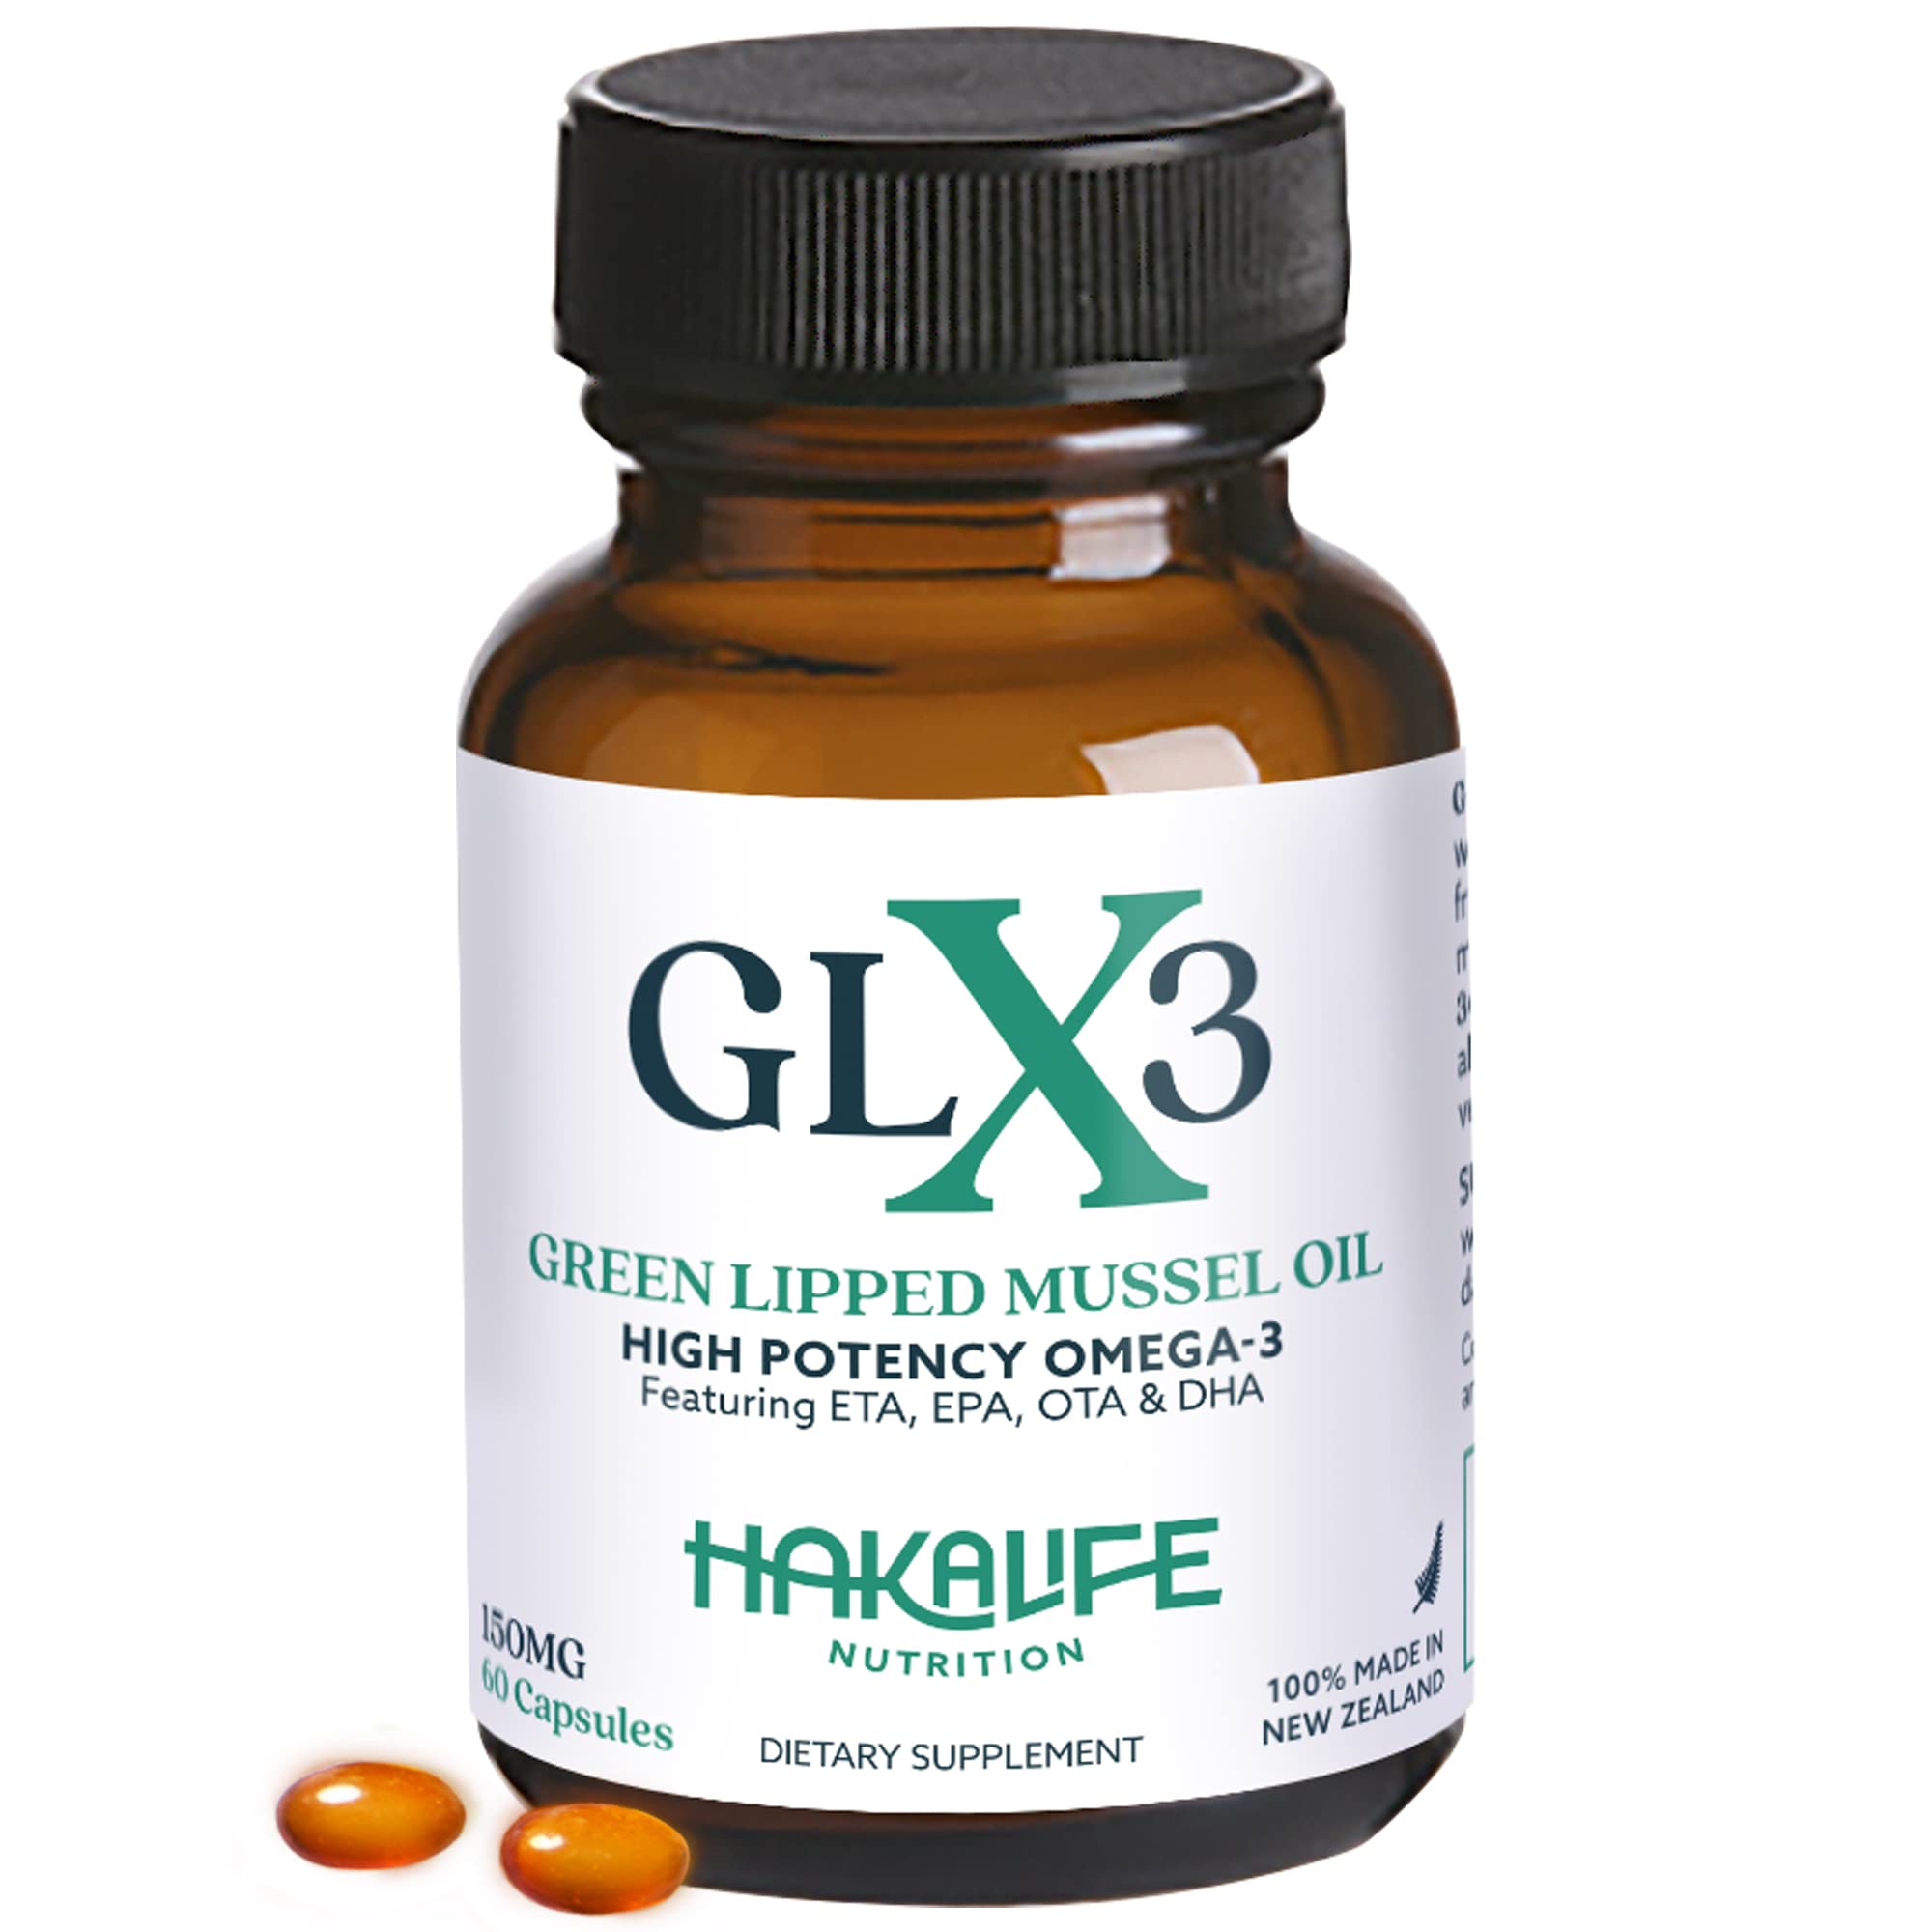 Haka Life Extra Strength Green Lipped Mussel Oil Capsules - Natural Omega 3 Joint Pain Relief Supplement - Omega 3 Fish Oil for Muscle Health, Rich...